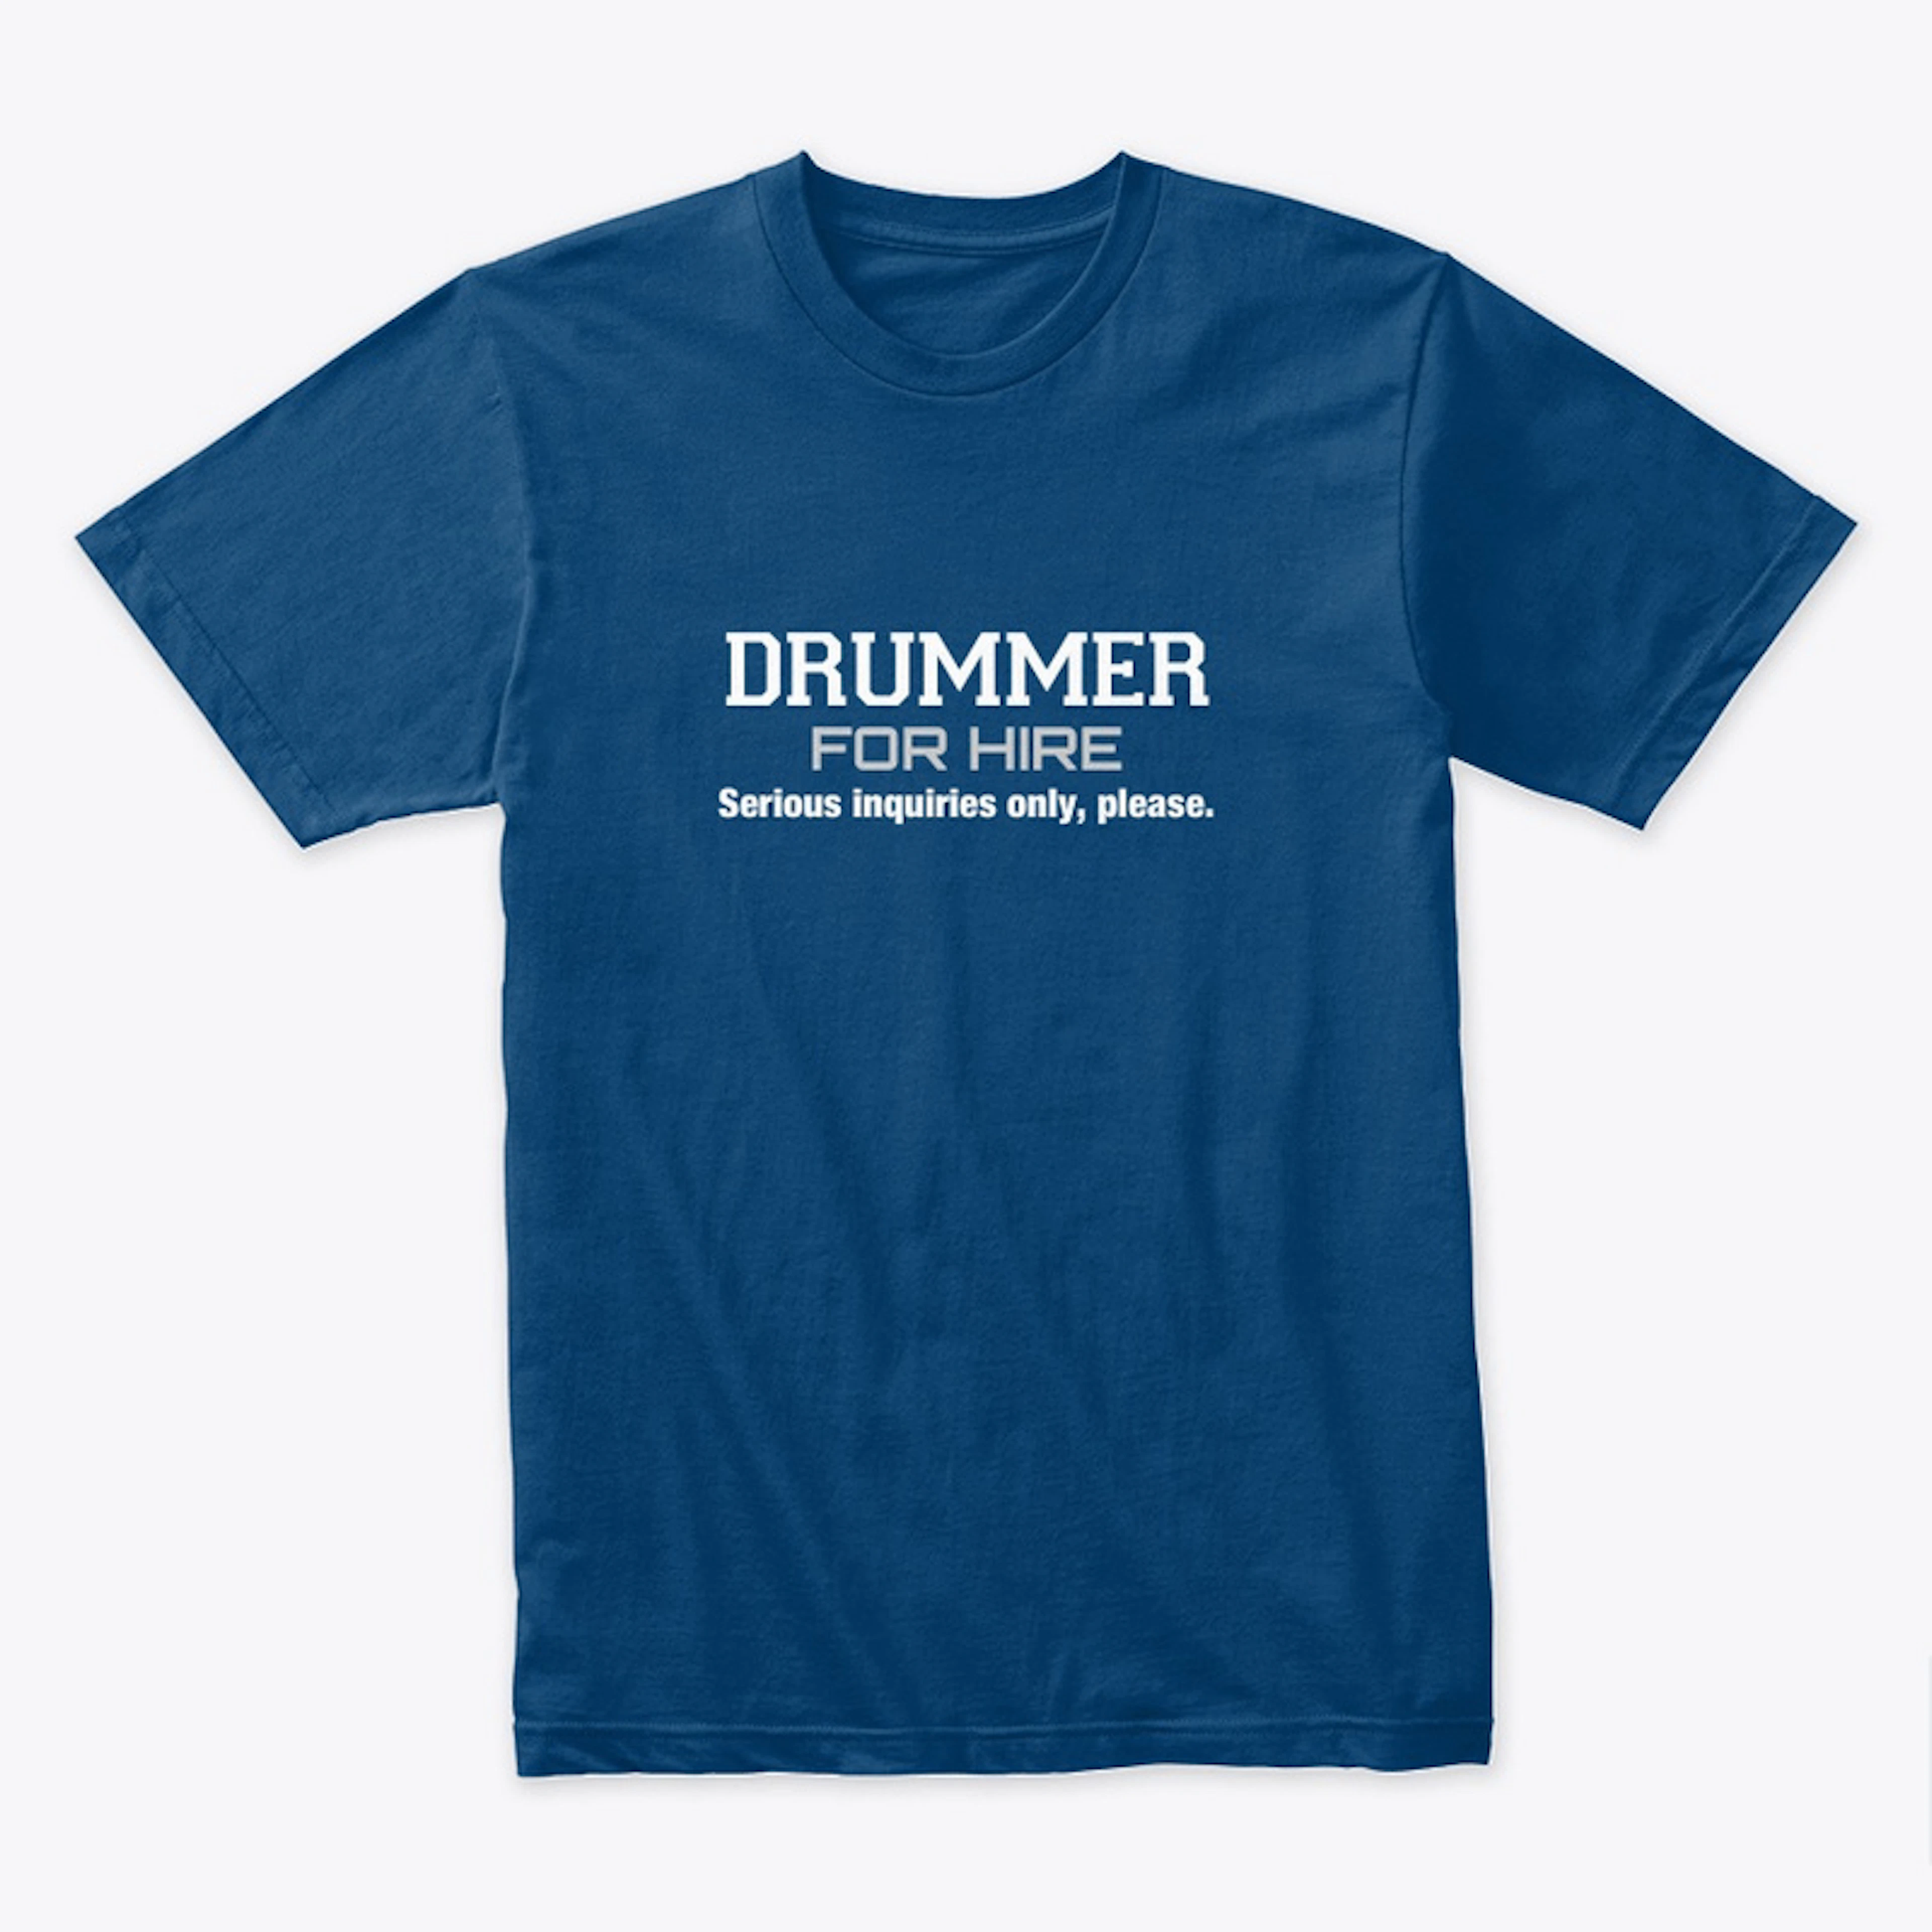 'Drummer For Hire' Premium Tee